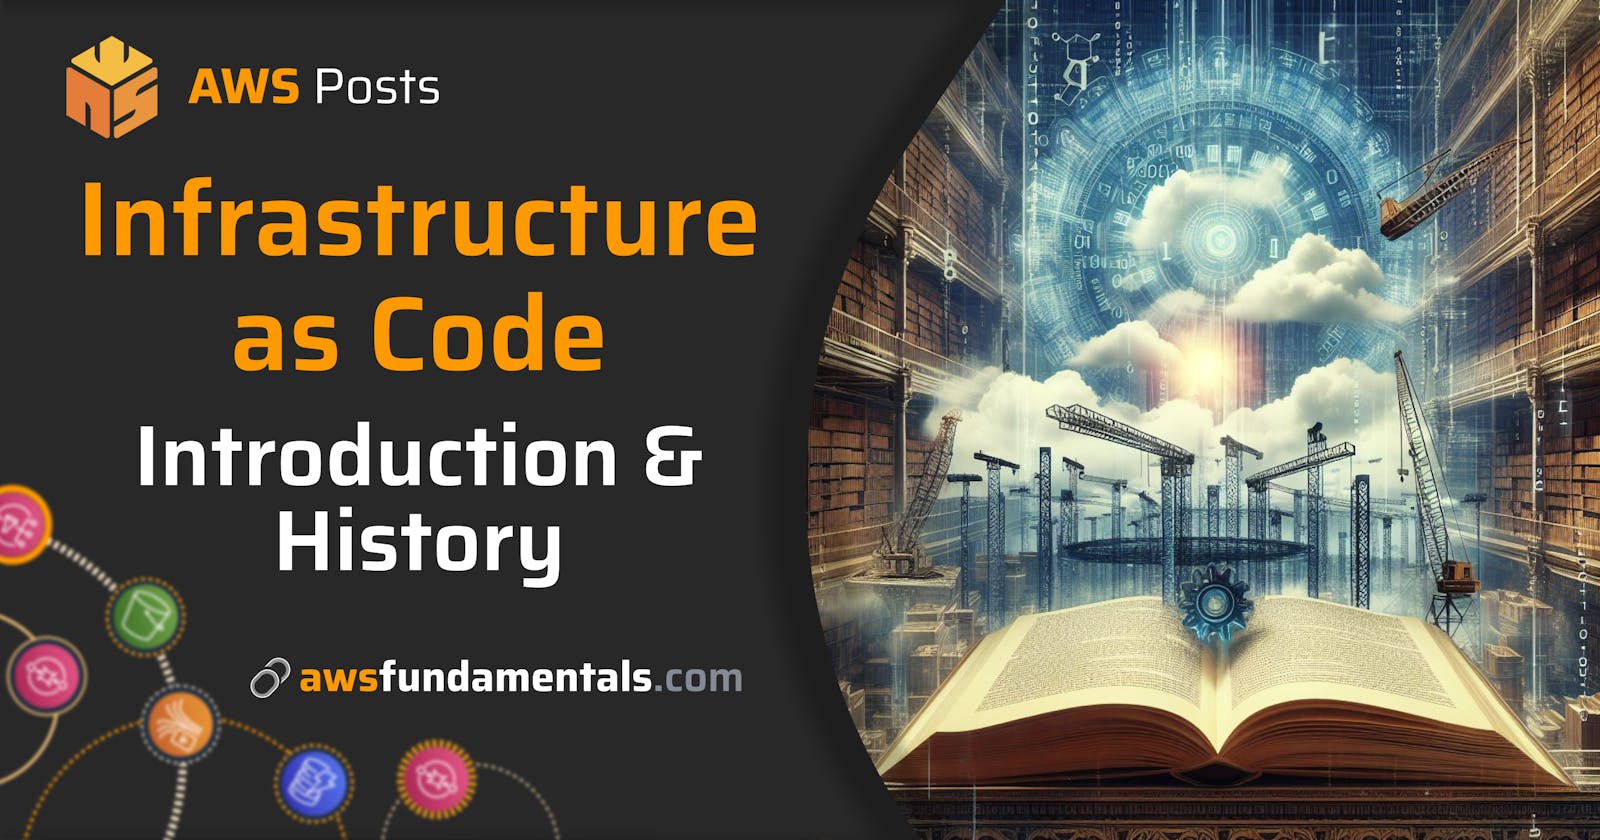 Infrastructure as Code on AWS - An Introduction